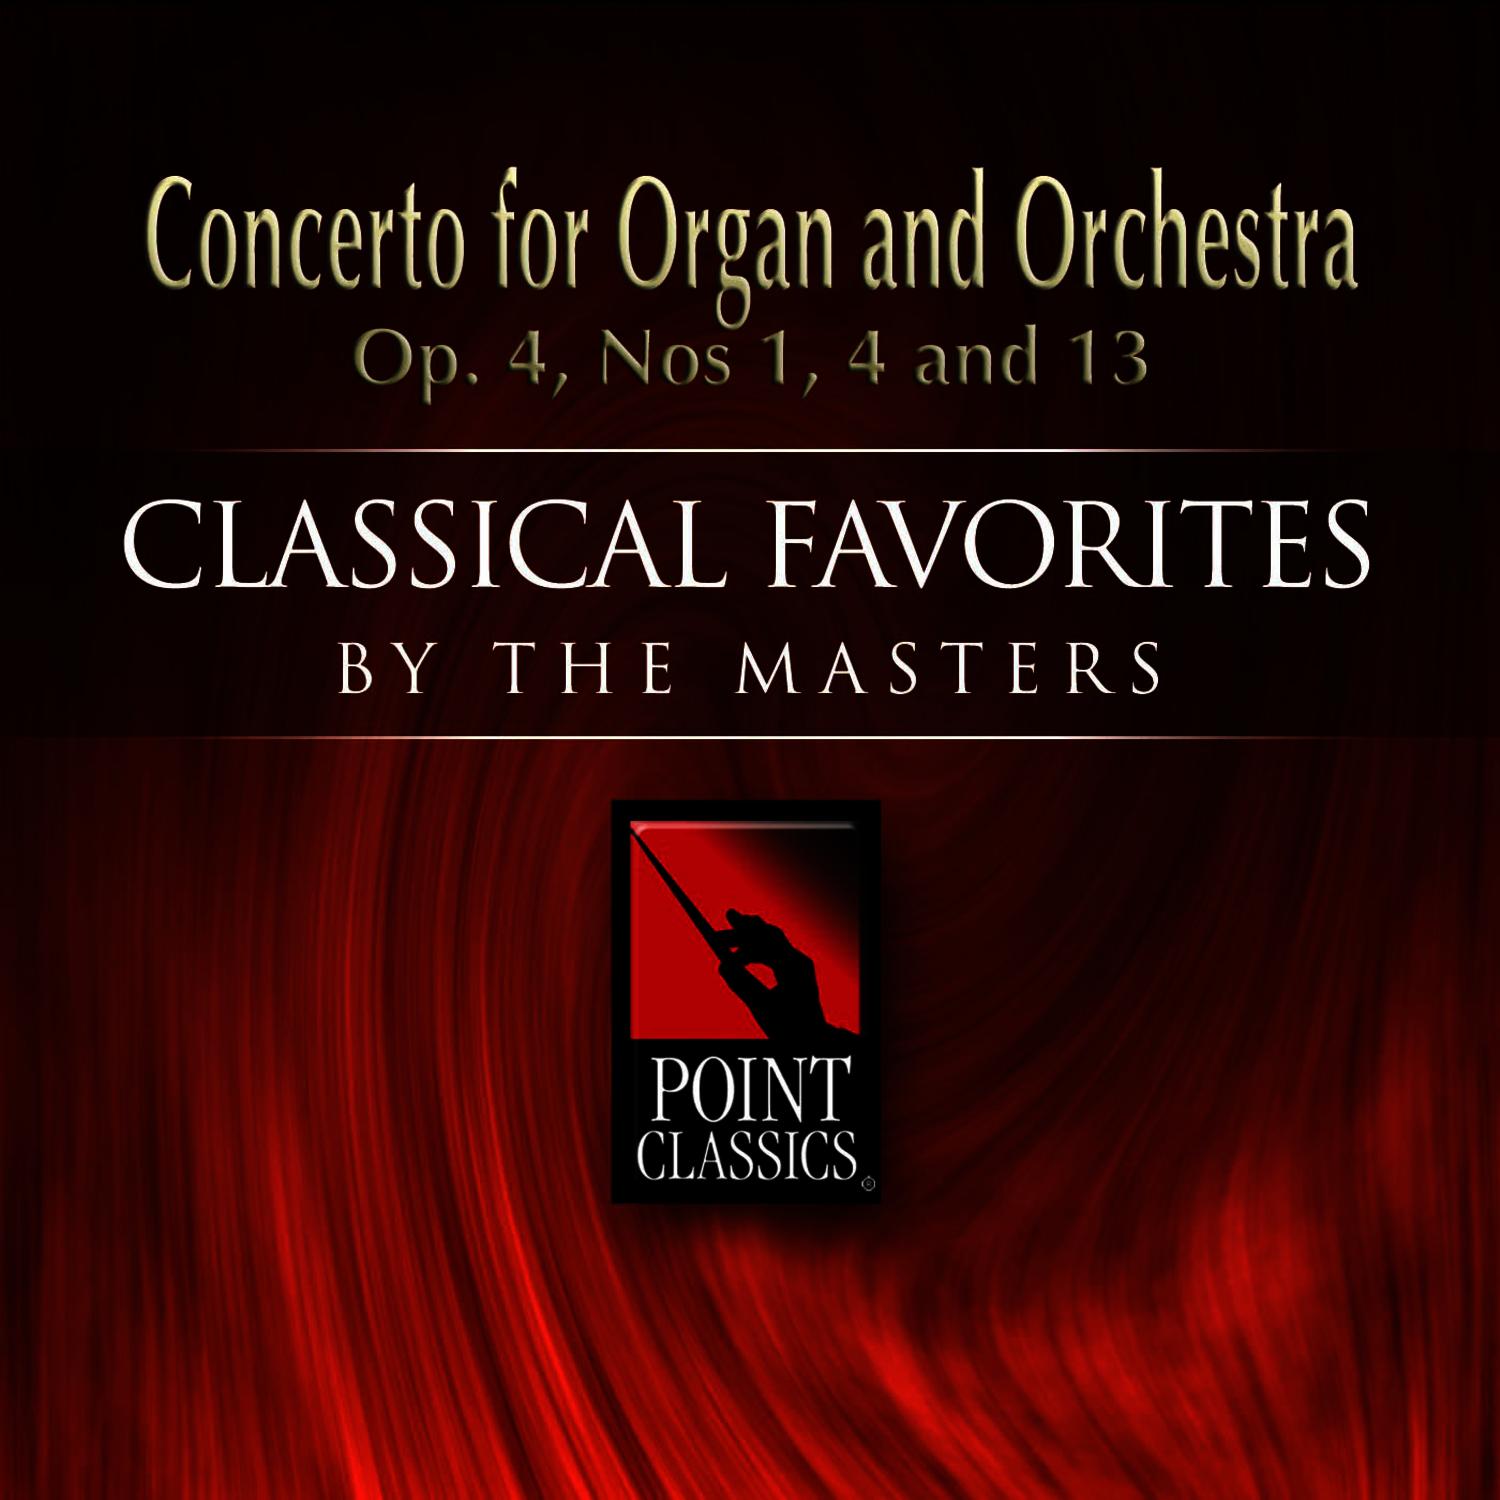 Concerto for Organ and Orchestra Op. 4 No. 1 in G minor: Andante